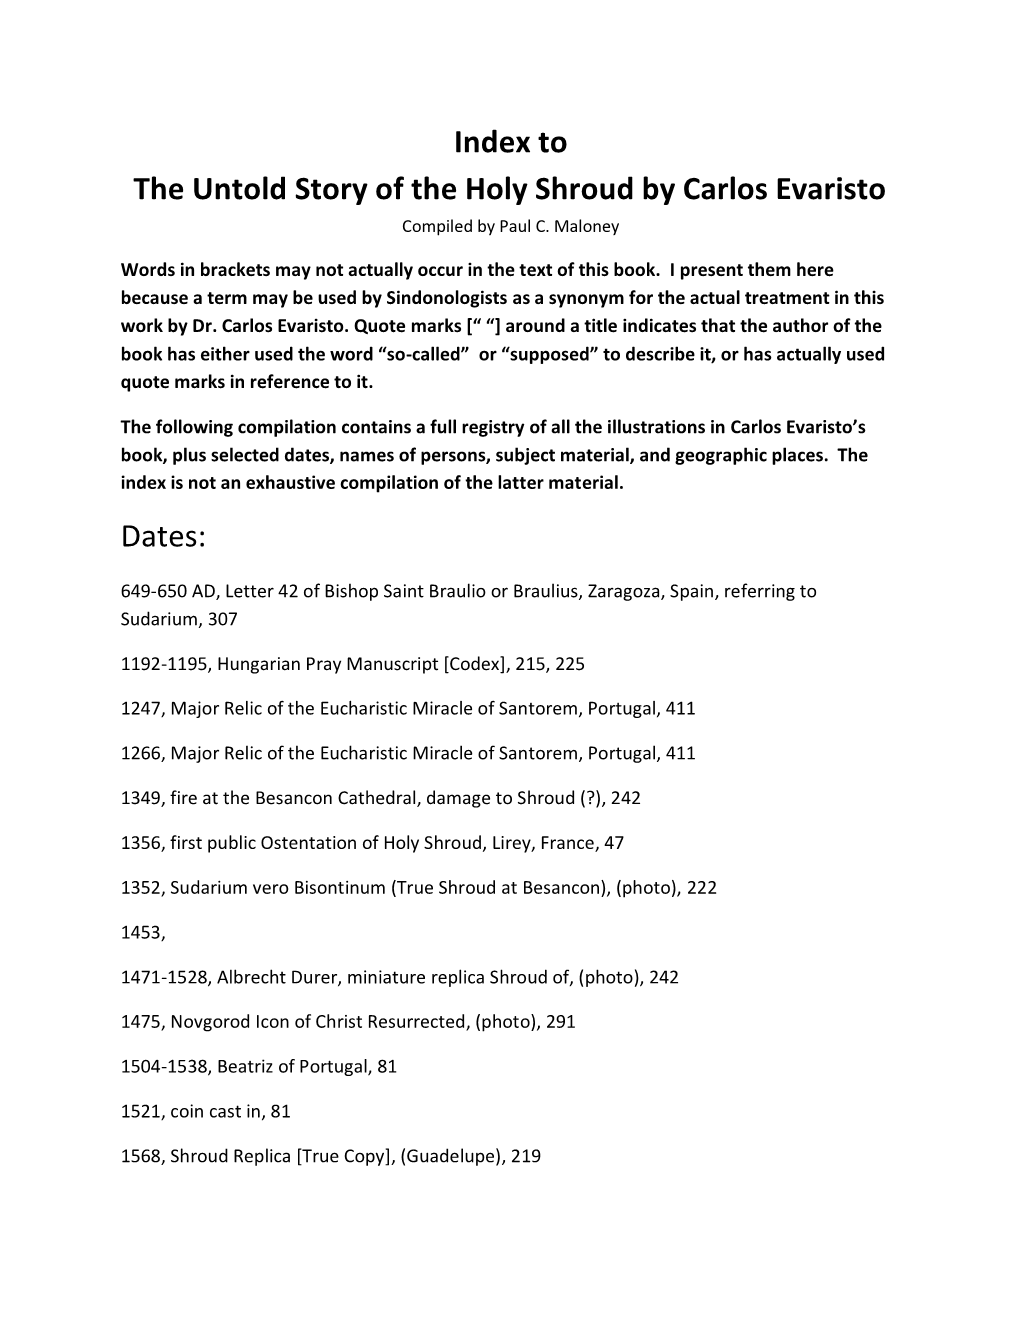 Index to the Untold Story of the Holy Shroud by Carlos Evaristo Compiled by Paul C